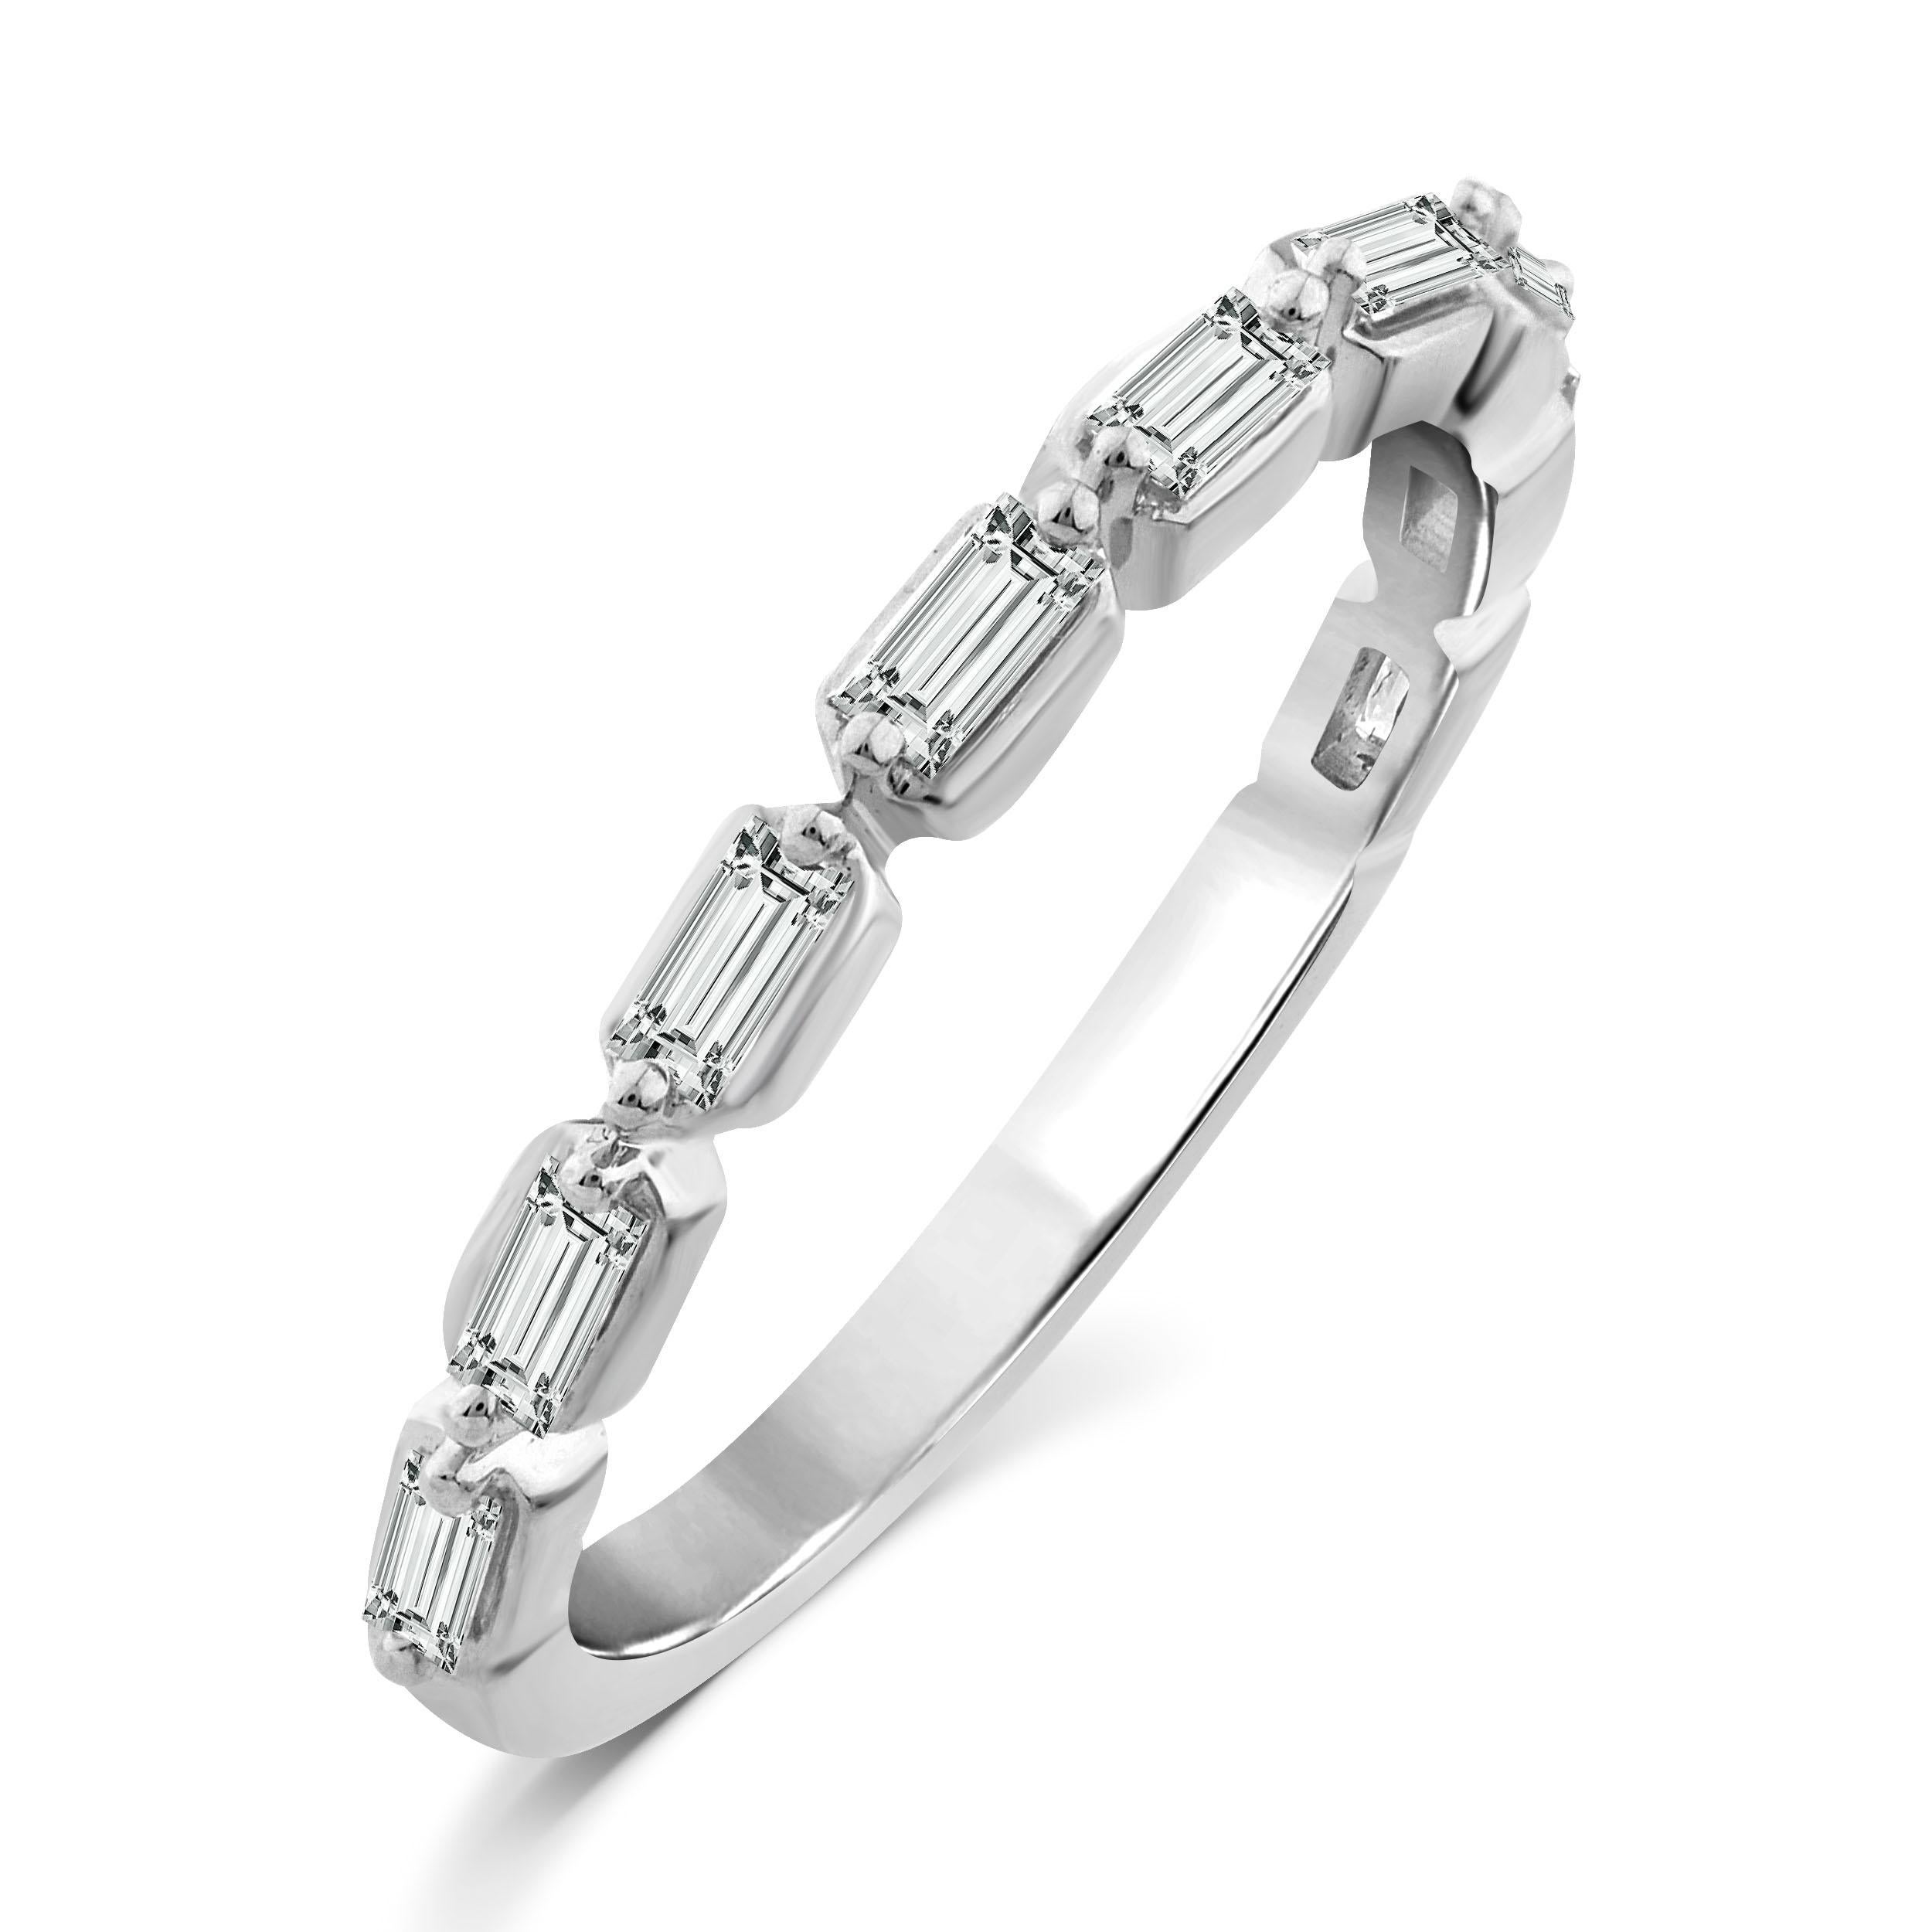 The Floating Baguette Diamond Band Ring is our take on classic diamond engagement bands with a modern twist. This semi eternity diamond band ring features horizontal baguettes set with spaces in between to create a floating look. This 14K white gold